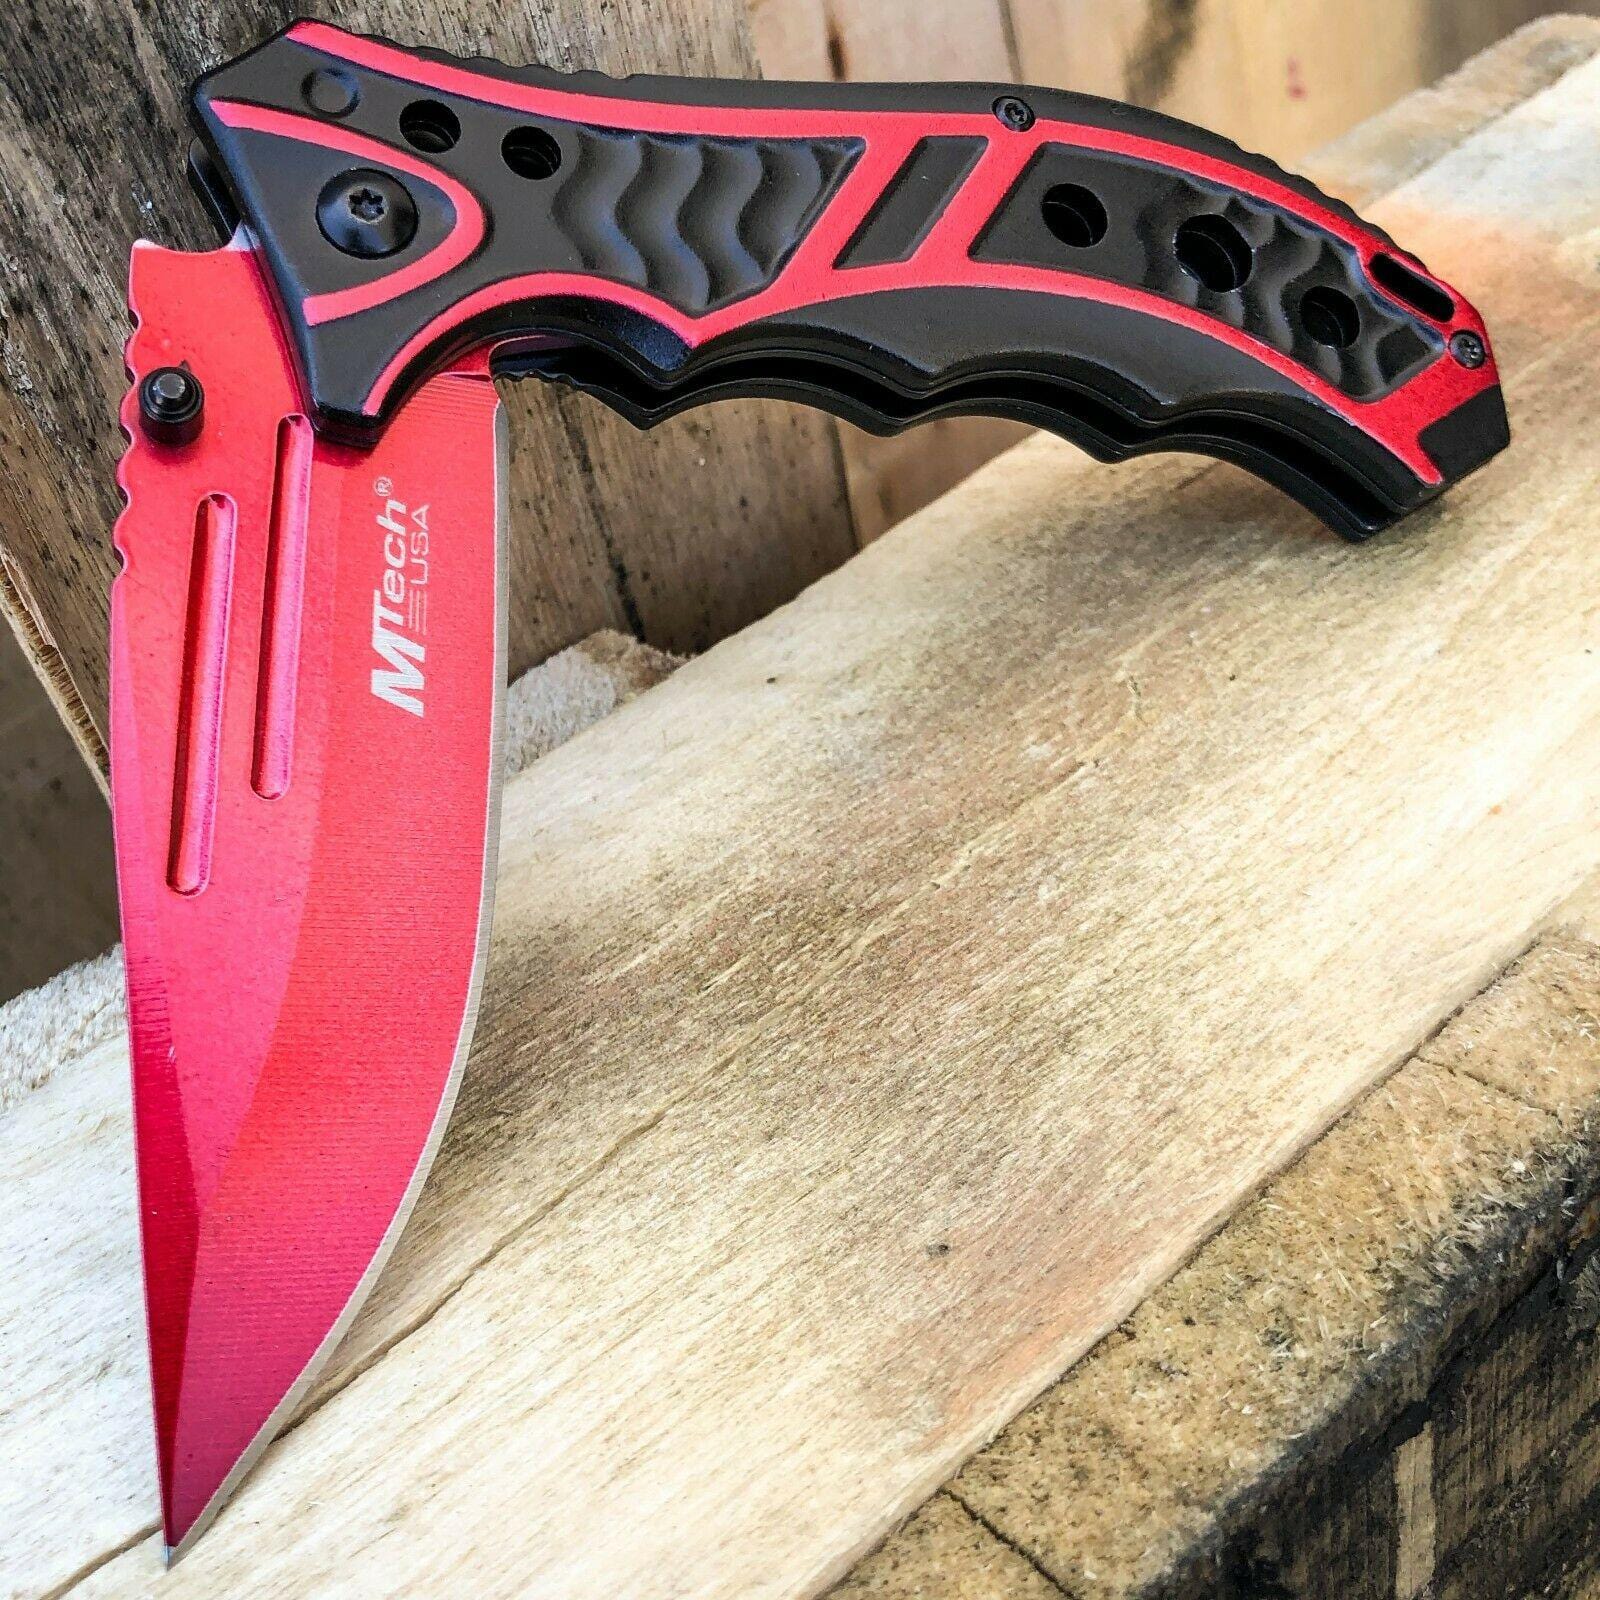  M-tech 8 Inch Spring Assisted Blood Red Folding Pocket Knife  Tactical Combat : Sports & Outdoors